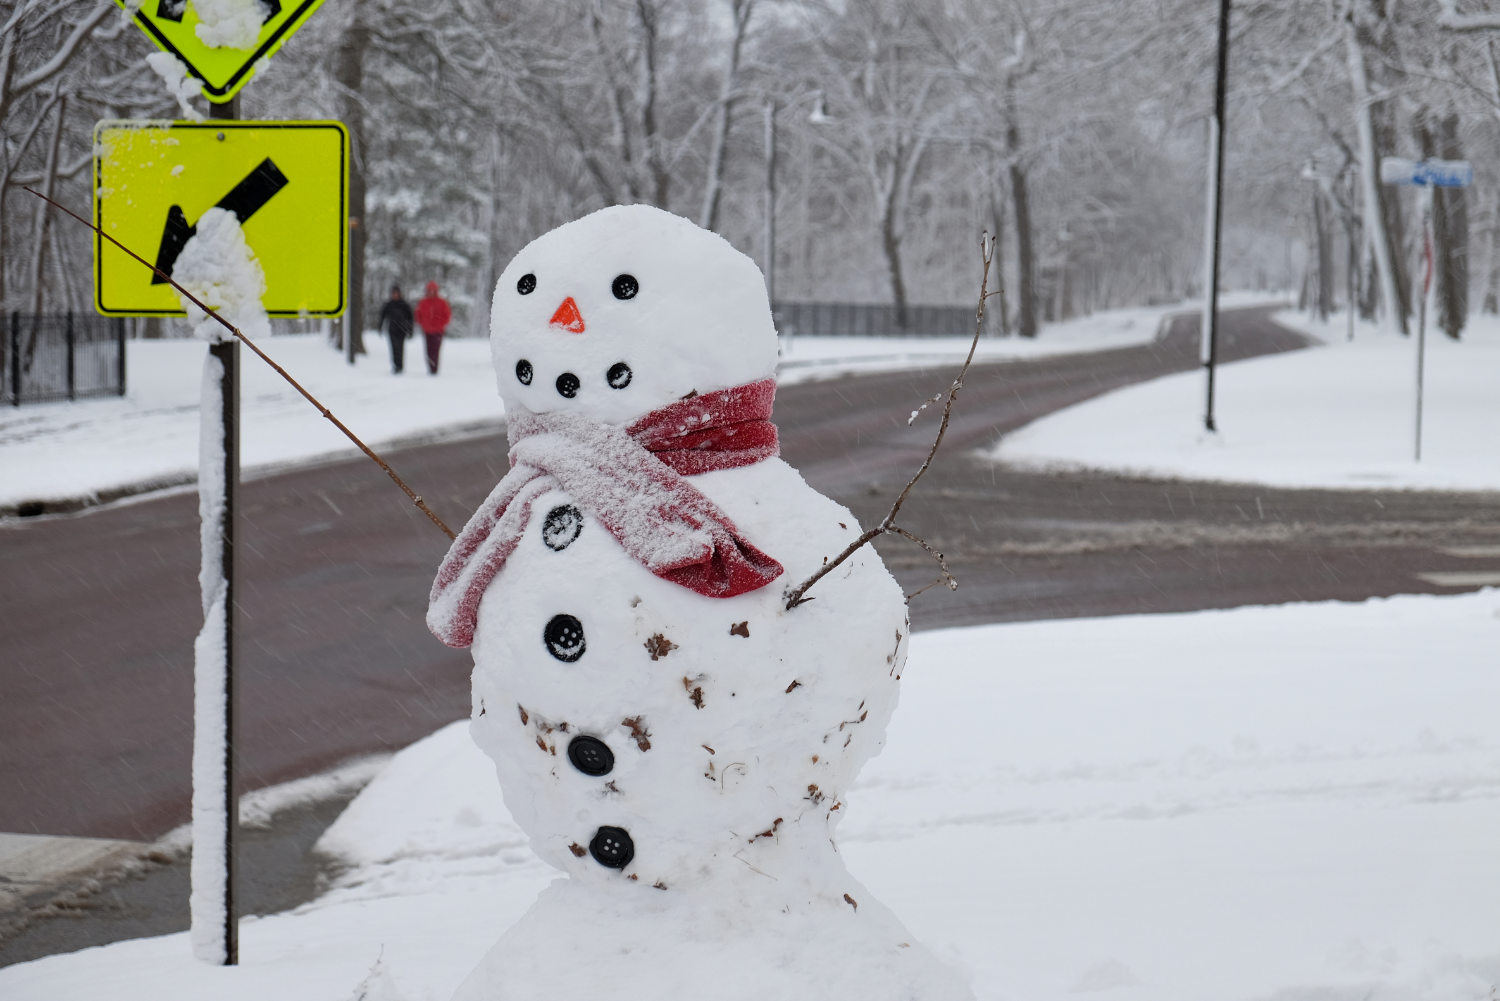 snowman detailed with black buttons and an orange triangle nose, with b yellow sign with arrow and couple walking in background